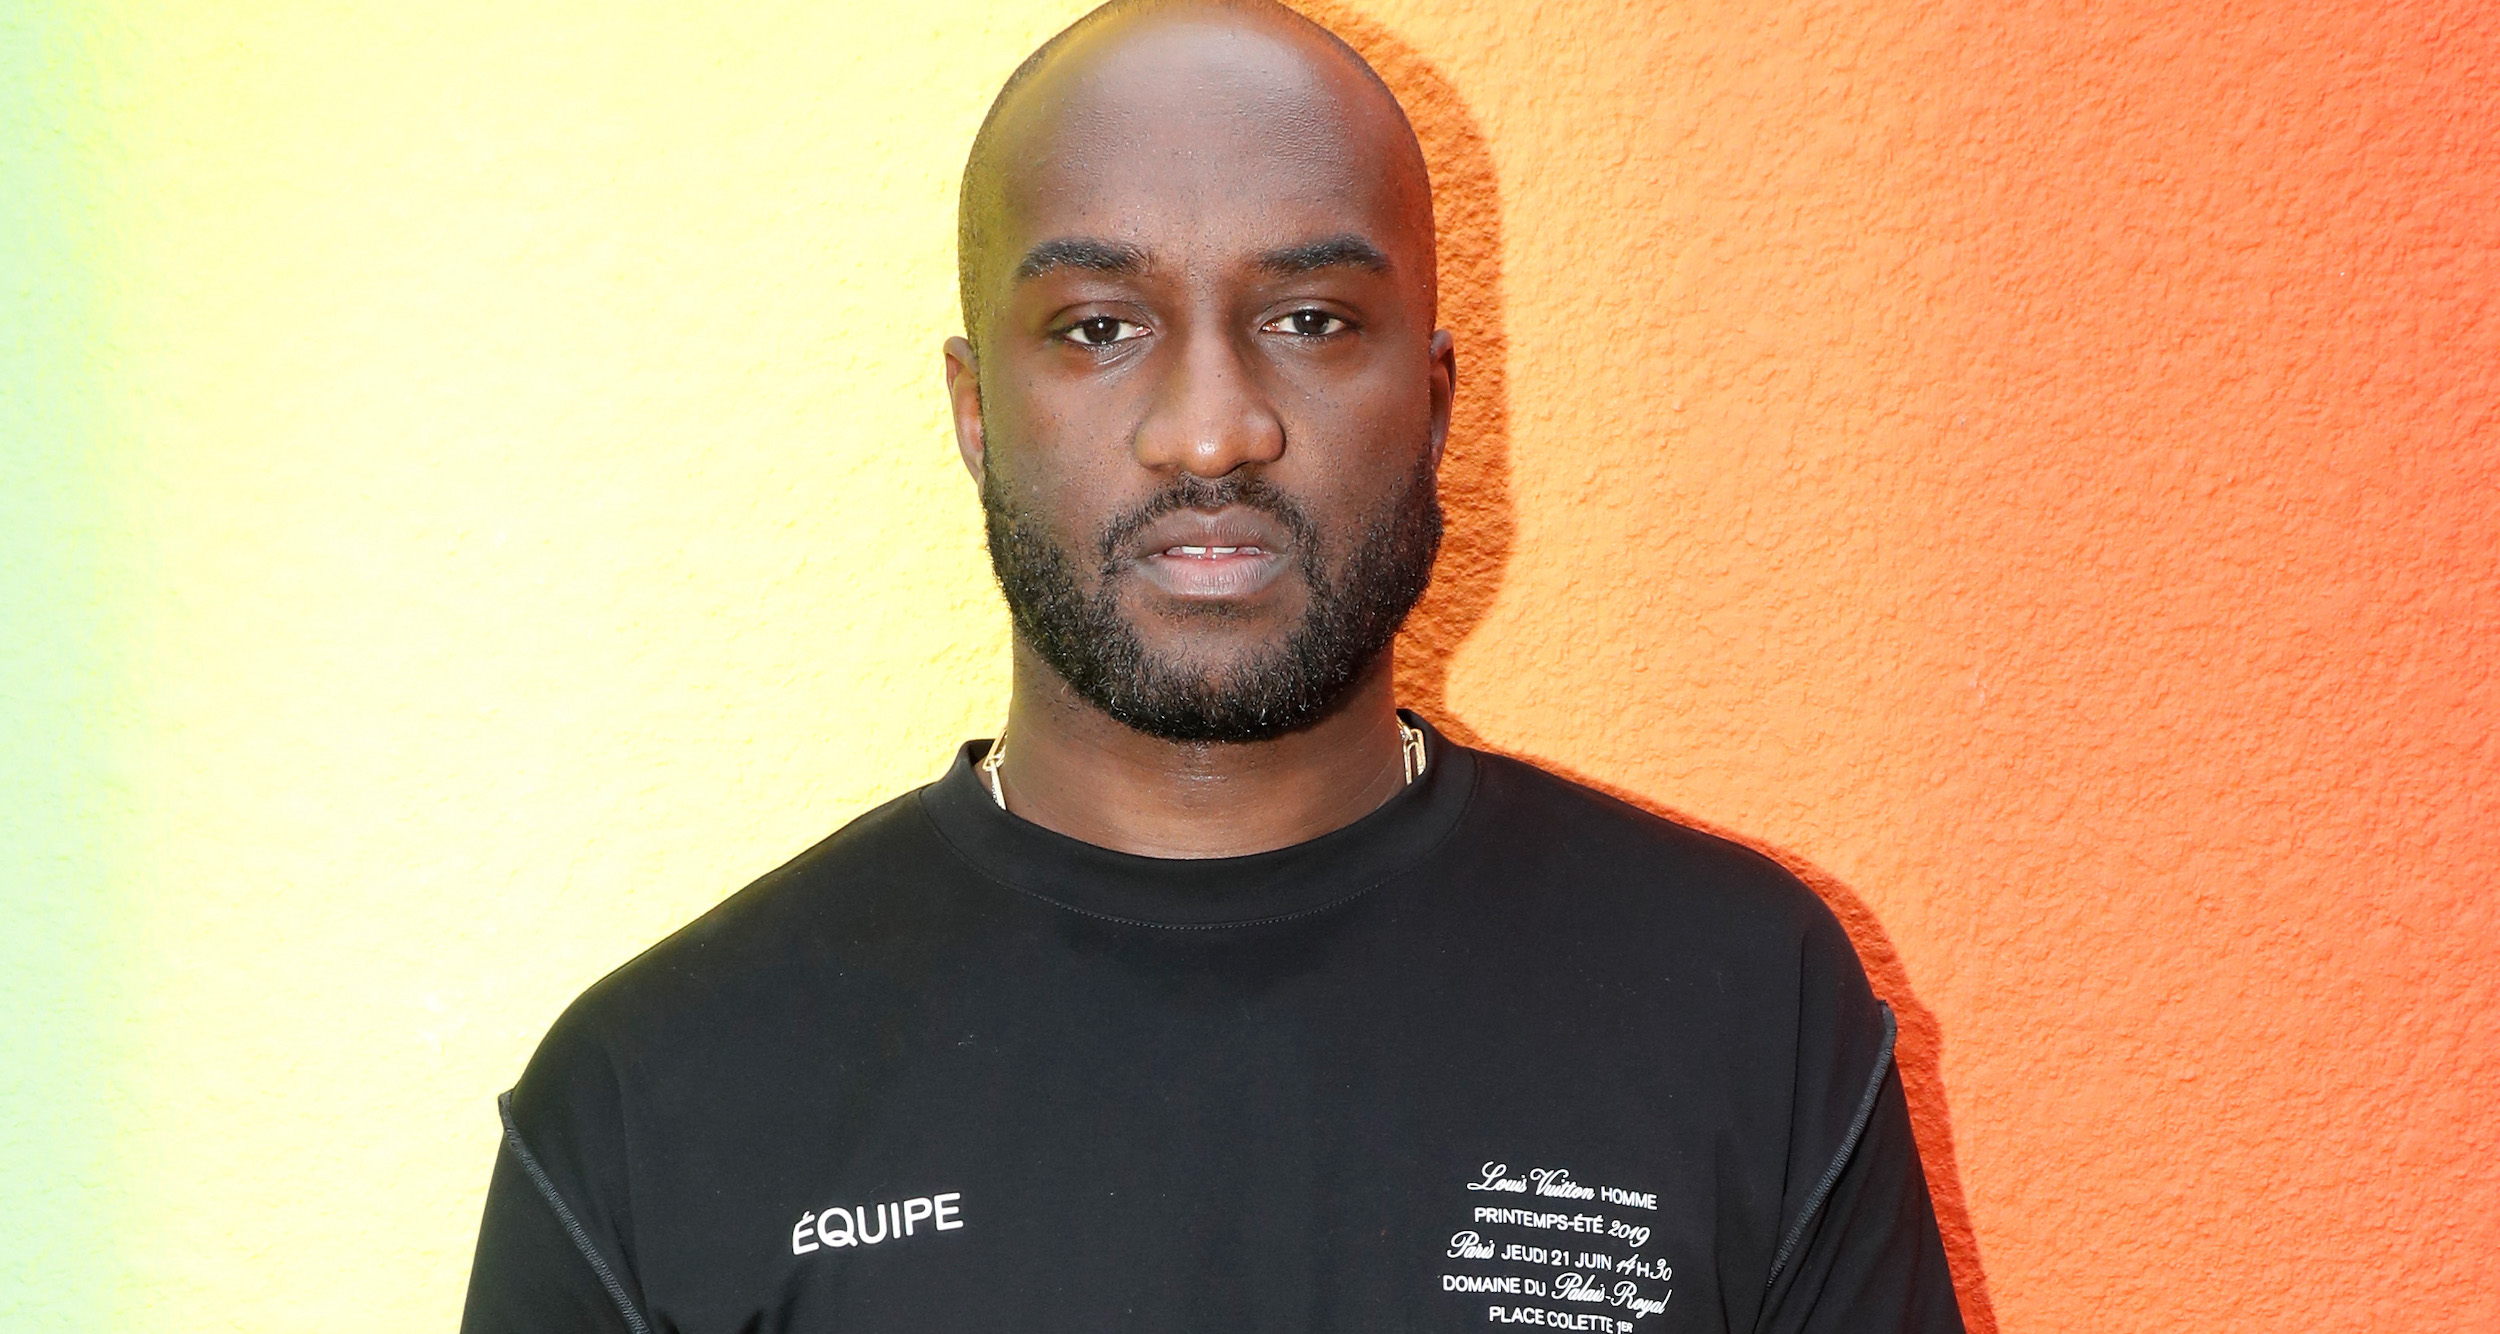 An incredibly kind genius': fashion and music stars pay tribute to Virgil  Abloh, Virgil Abloh